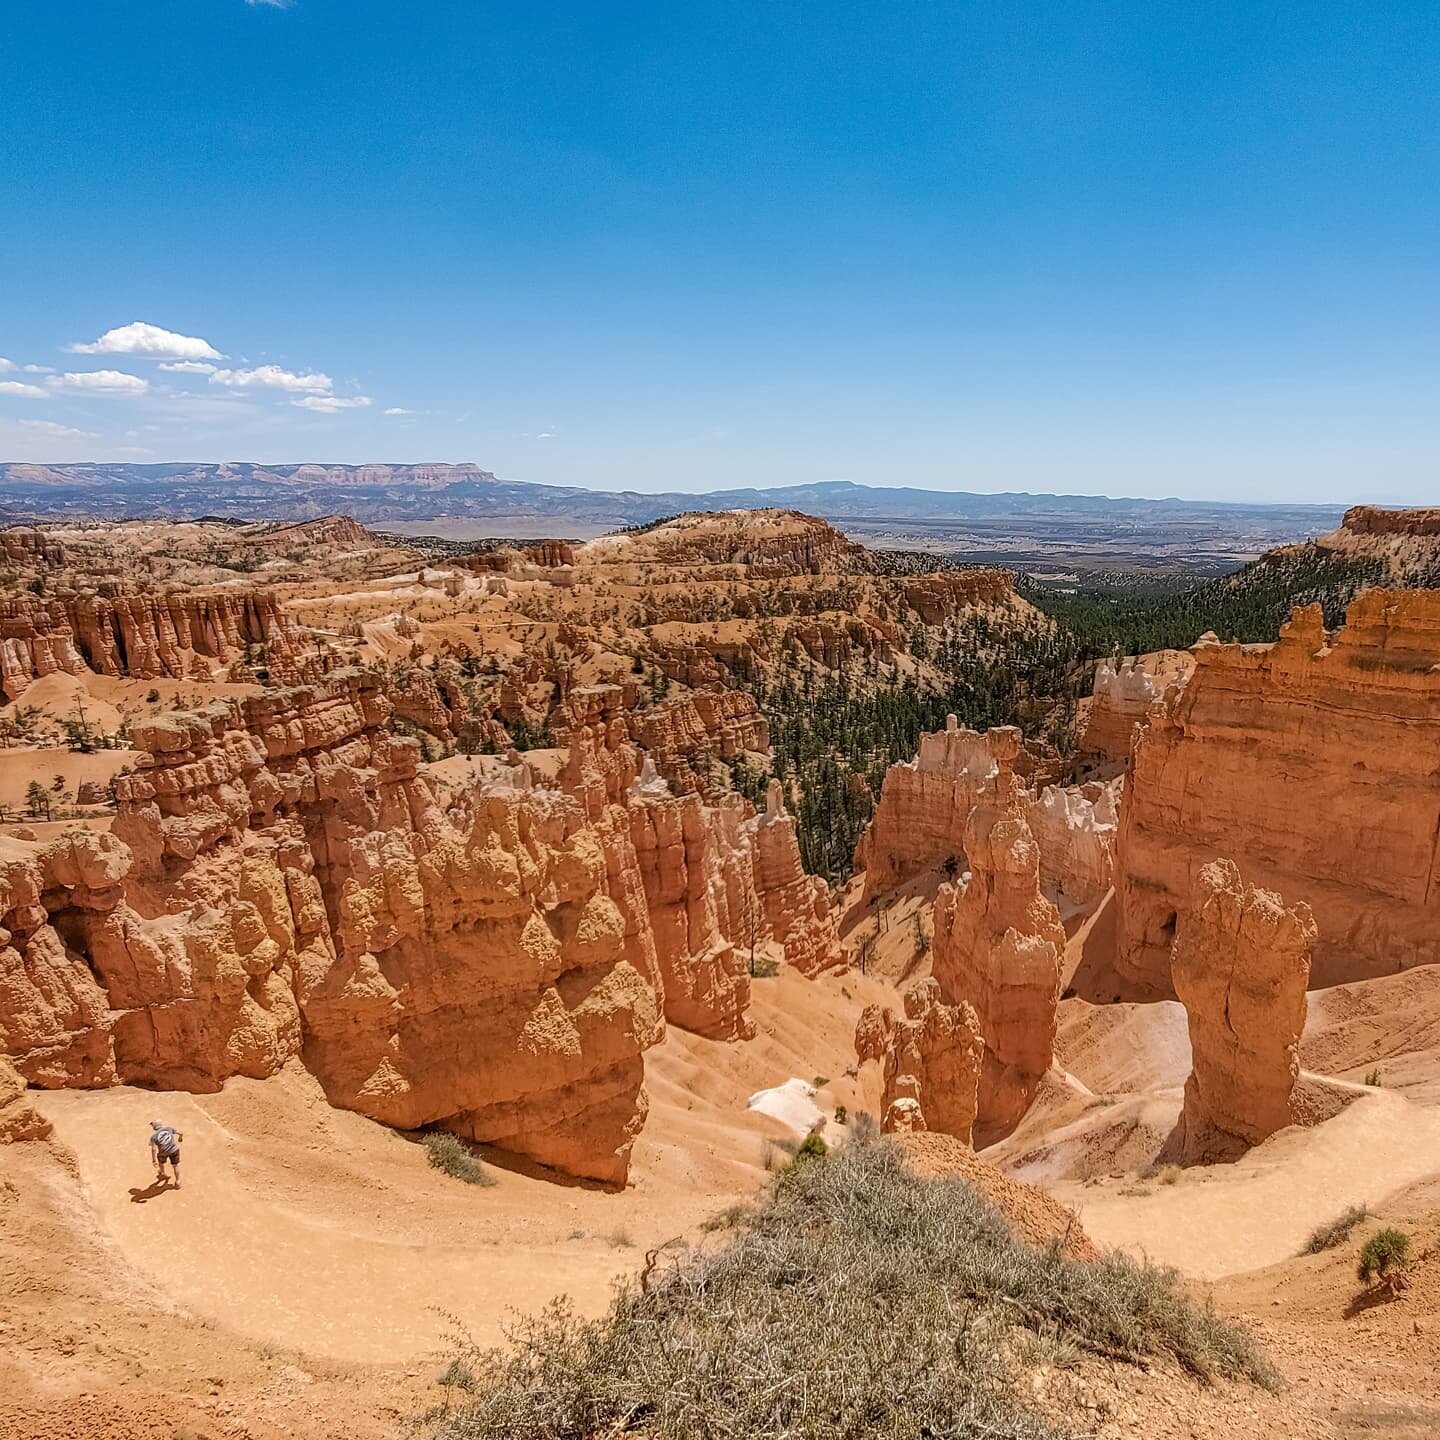 **Save for visiting Bryce Canyon National Park**

Have you been to Bryce Canyon yet? This Utah park is known for its hoodoos, gorgeous sunsets, and fun trails with tunnels. It's also a lot cooler than the other Utah national parks, so you can comfort